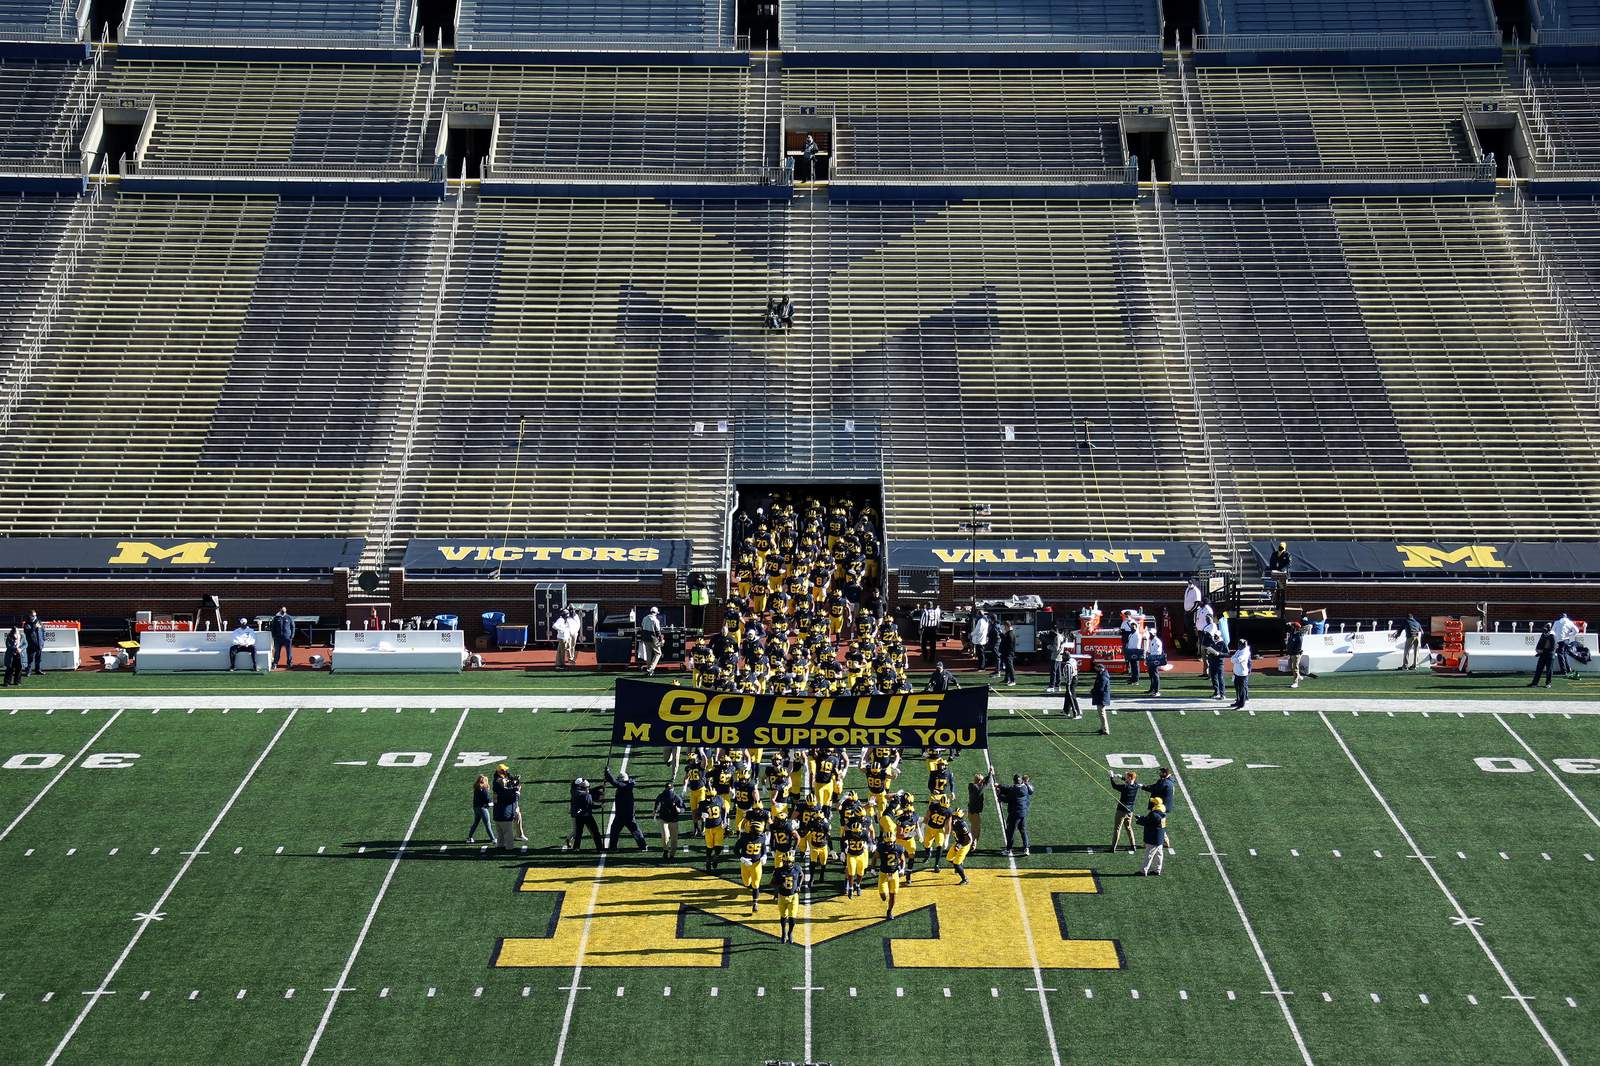 Michigan football pausing team activities due to COVID-19 concerns